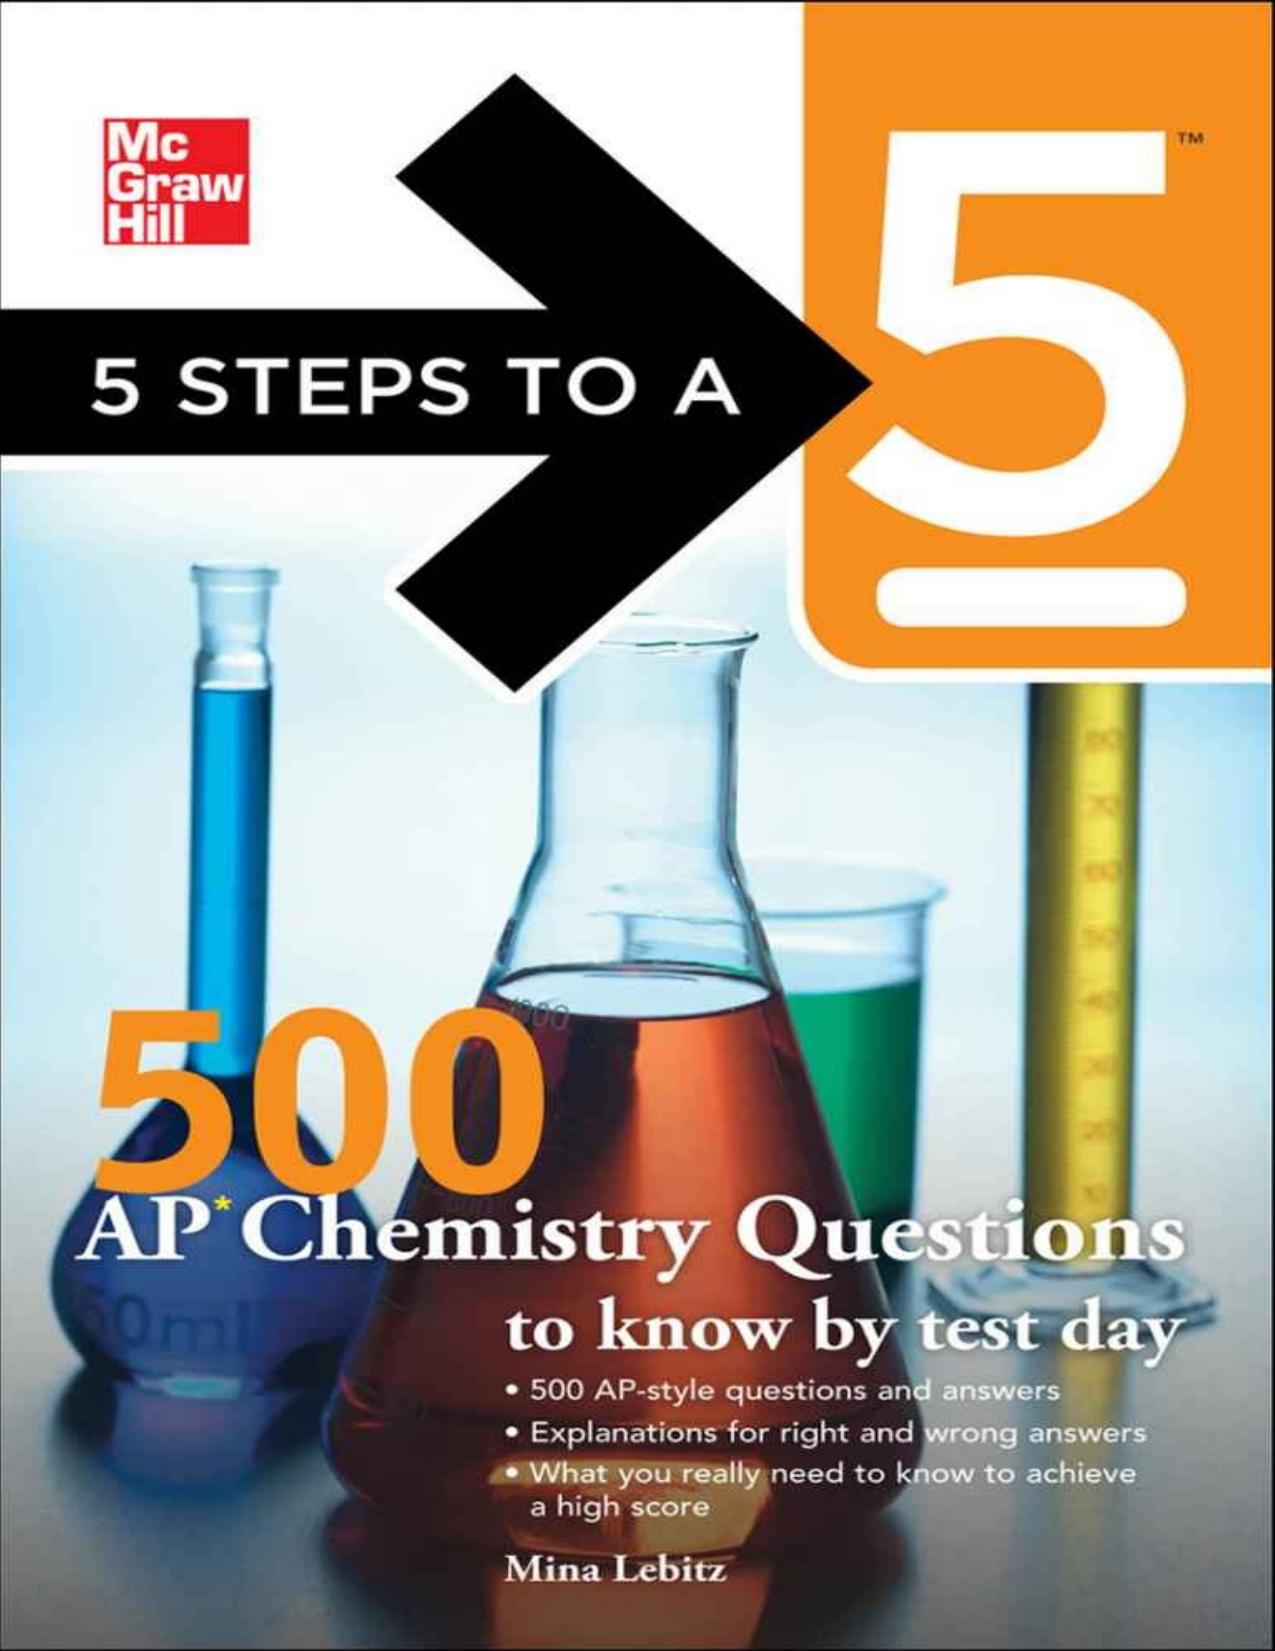 5 Steps to a 5 500 AP Chemistry Questions to Know by Test Day.jpg